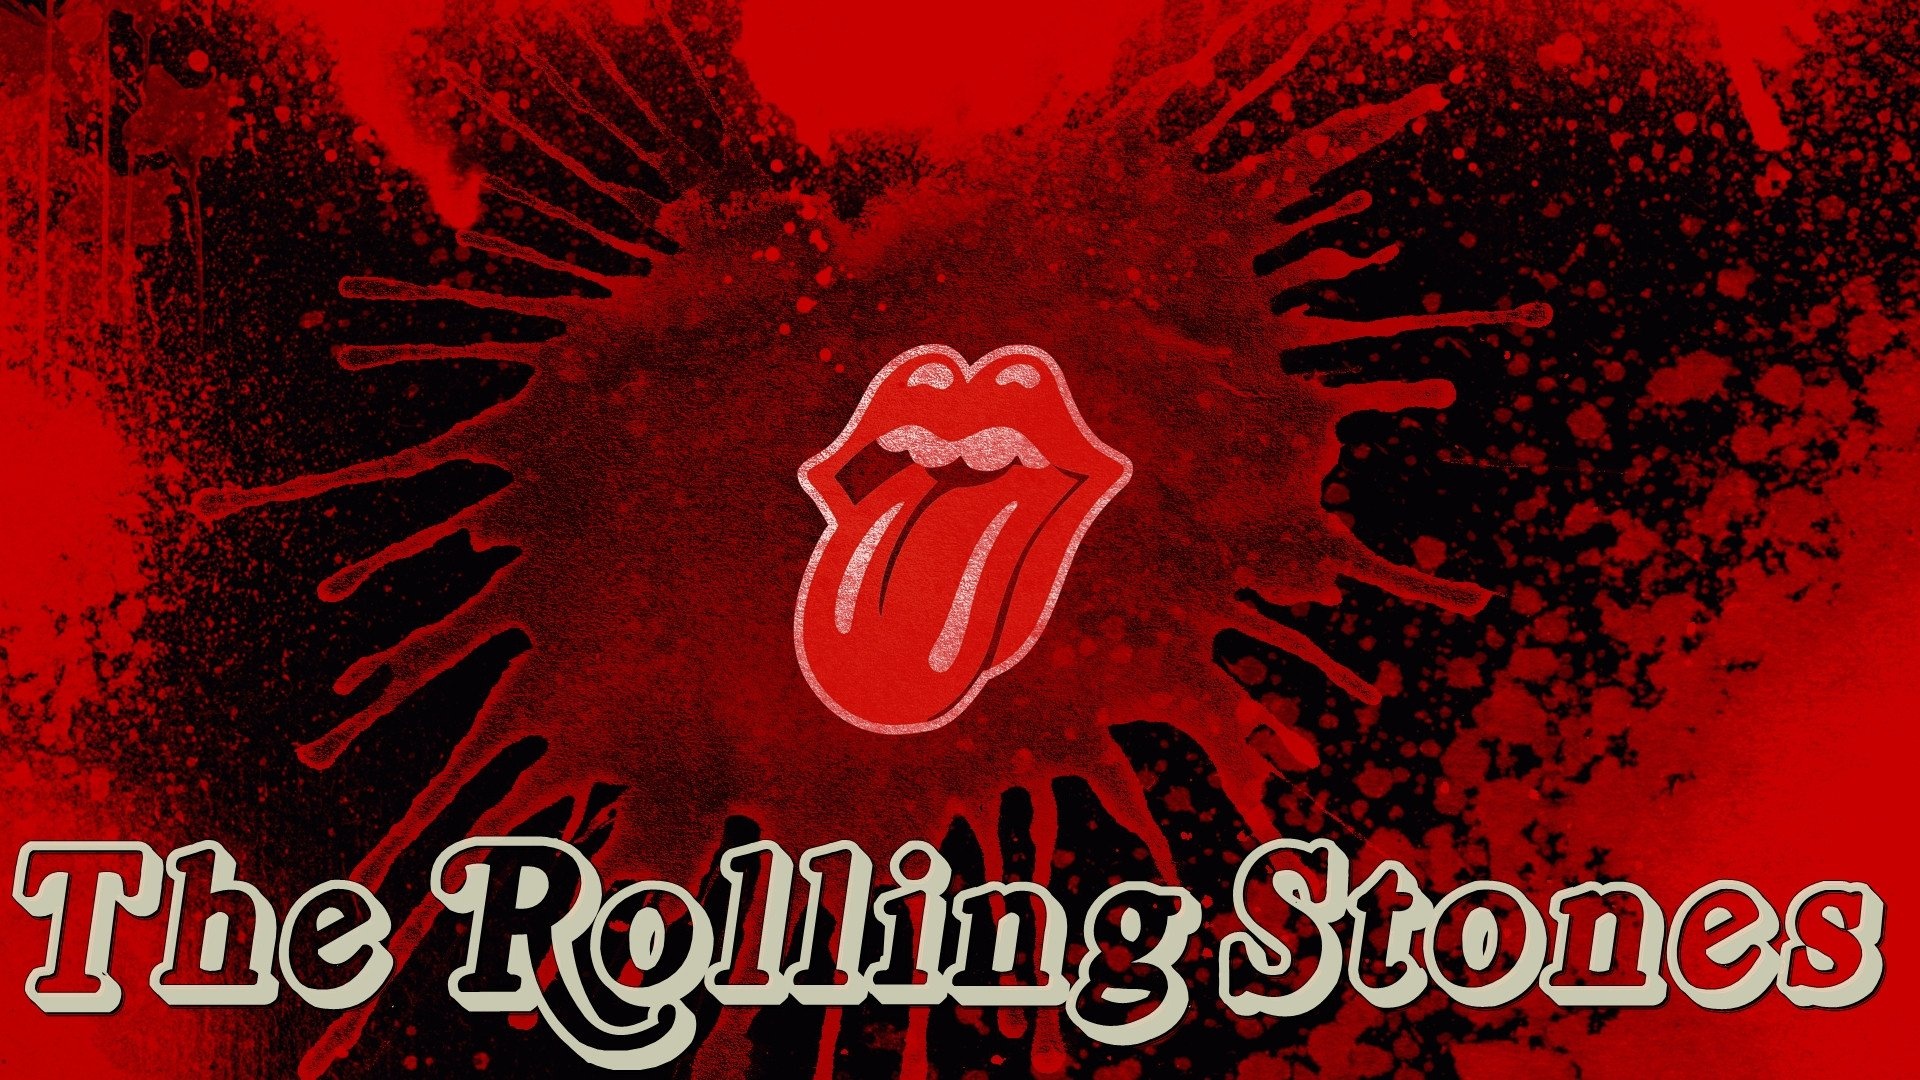 The Rolling Stones, Iconic rock band, Musical legacy, Live album release, 1920x1080 Full HD Desktop